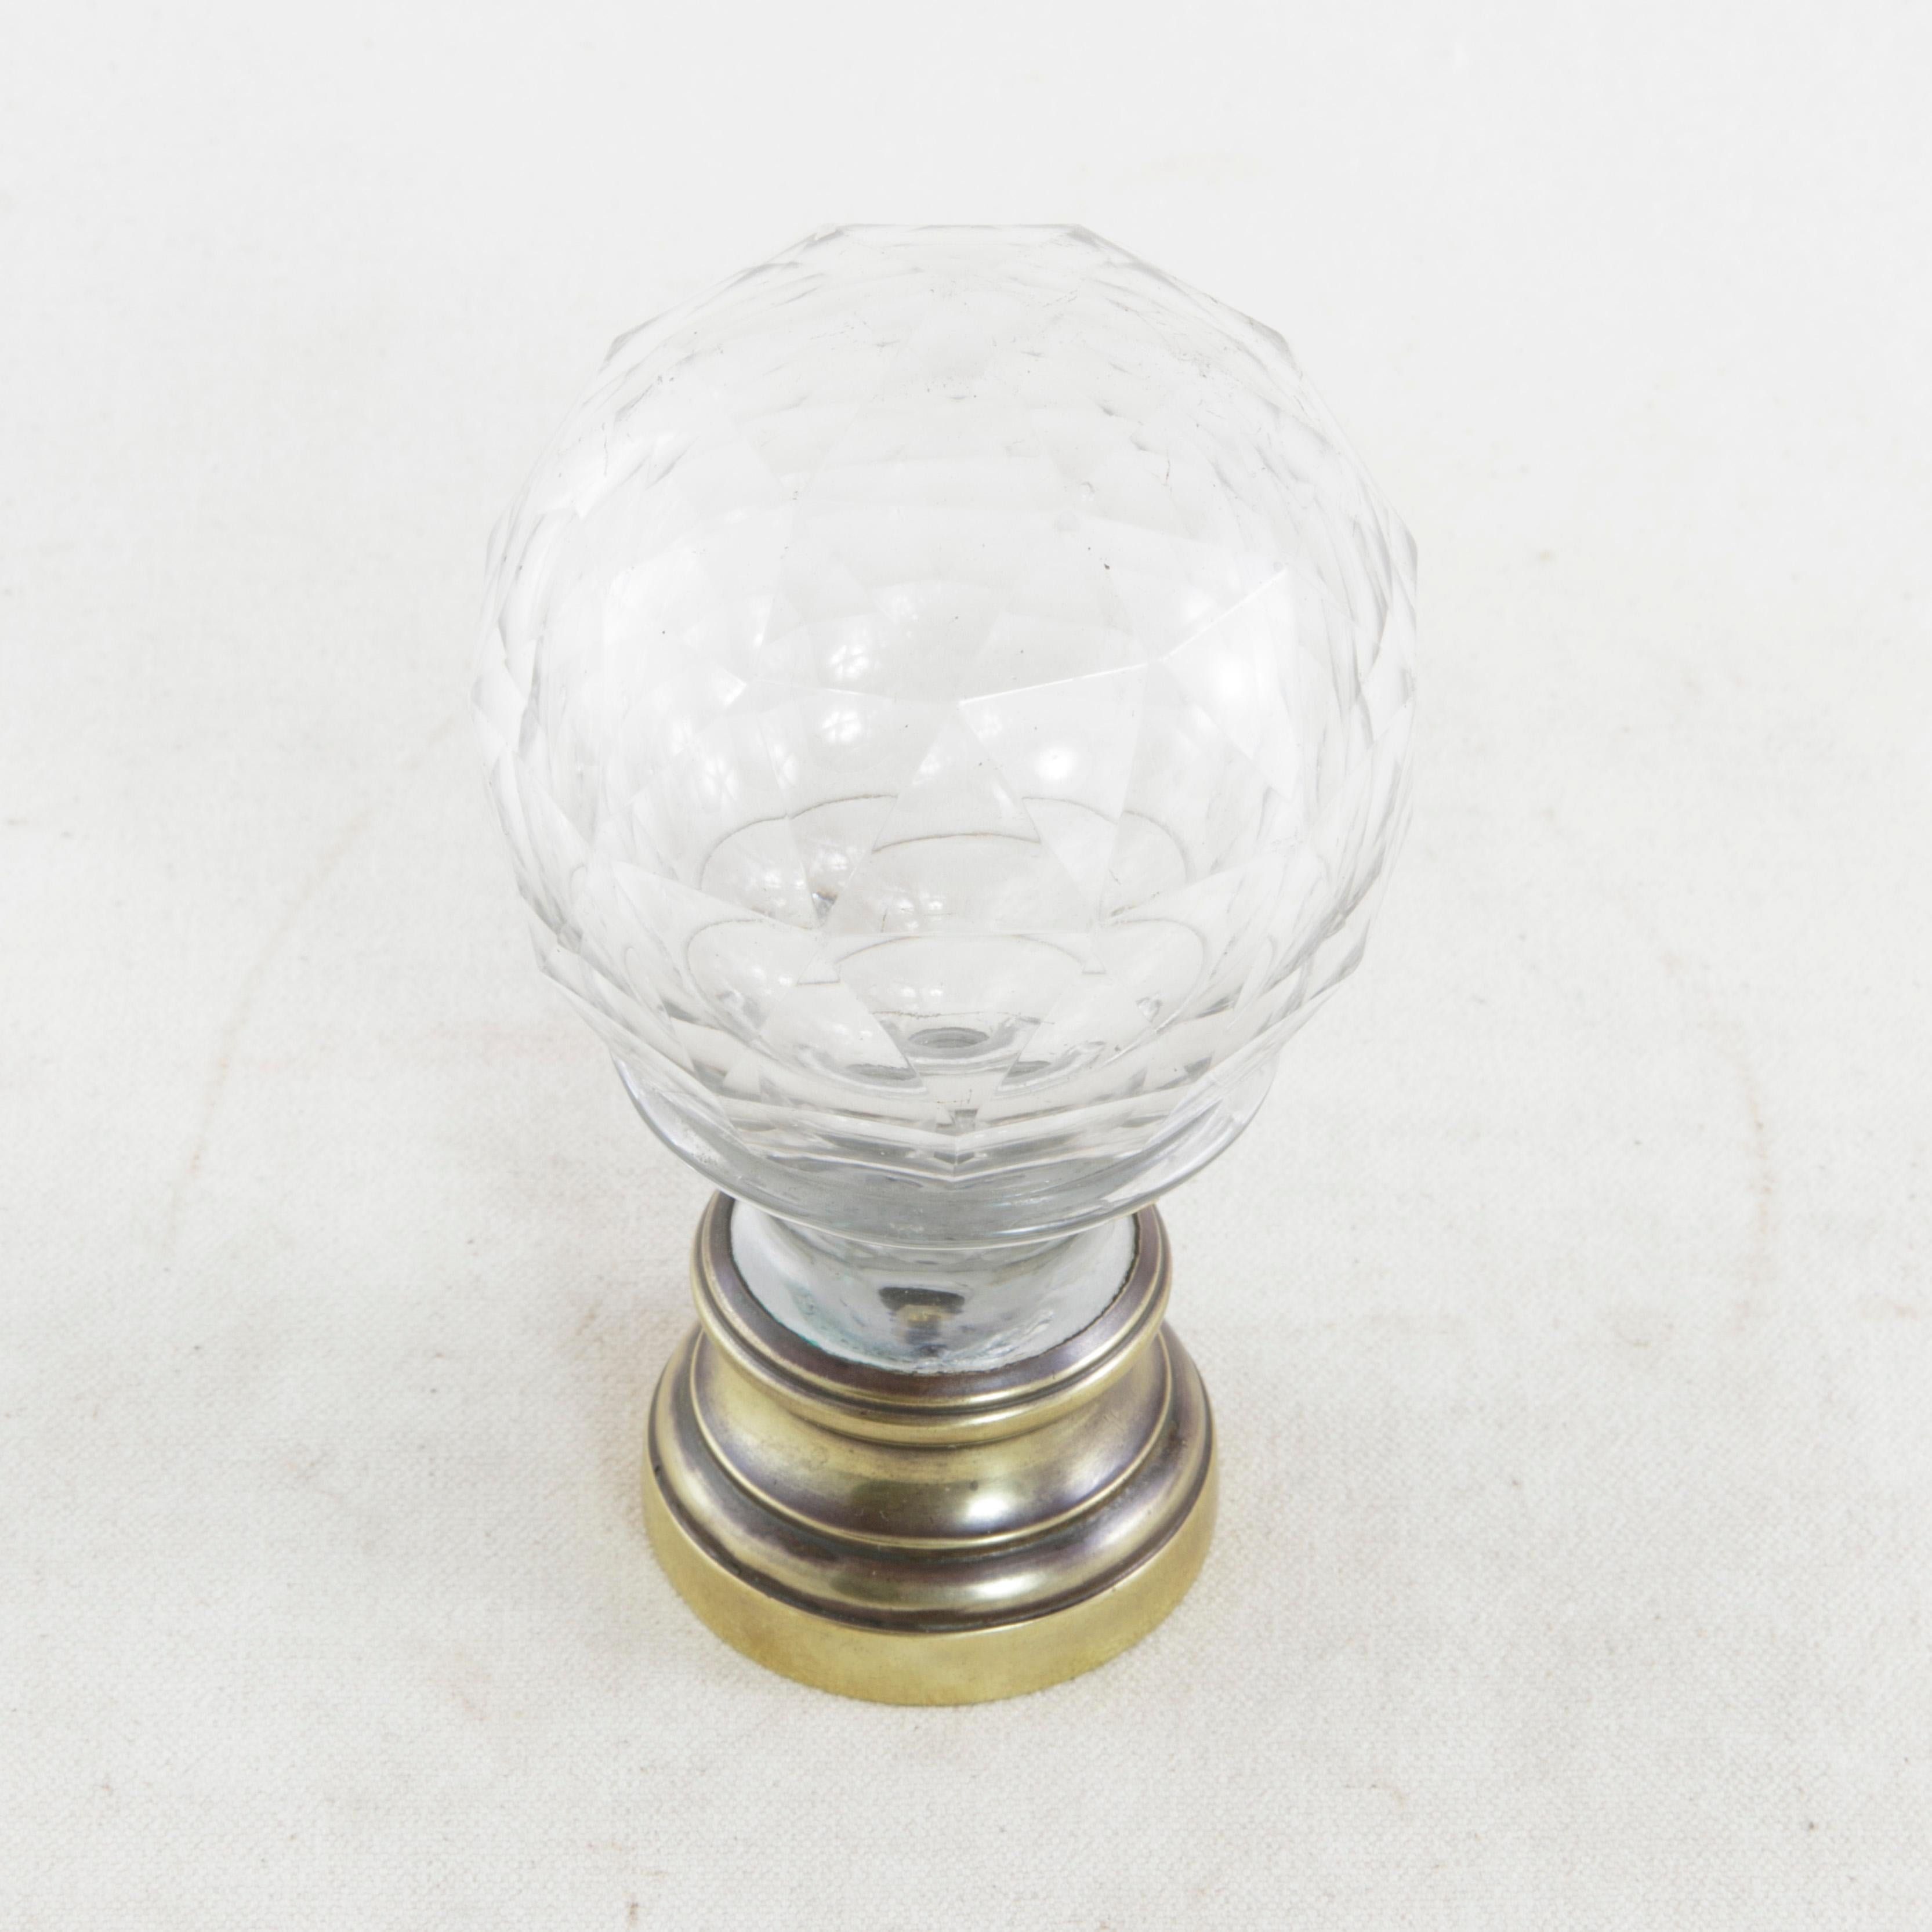 This mid-19nth century Napoleon III period staircase finial features a multifaceted crystal ball mounted on a bronze base. The plate underneath the bronze base is threaded to accommodate a long screw, allowing it to be affixed to a staircase